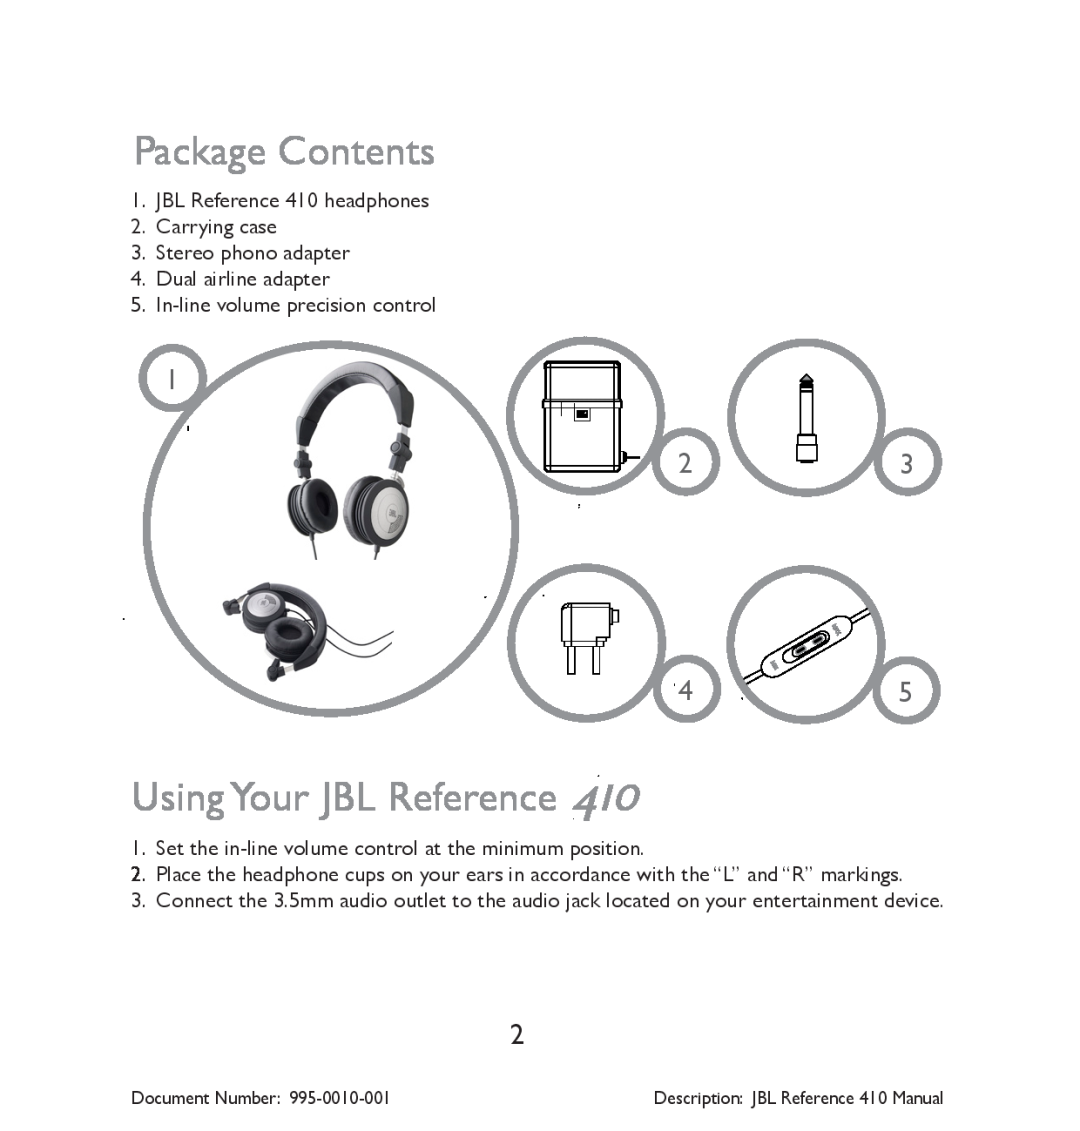 JBL 410 manual Package Contents, Using Your JBL Reference 